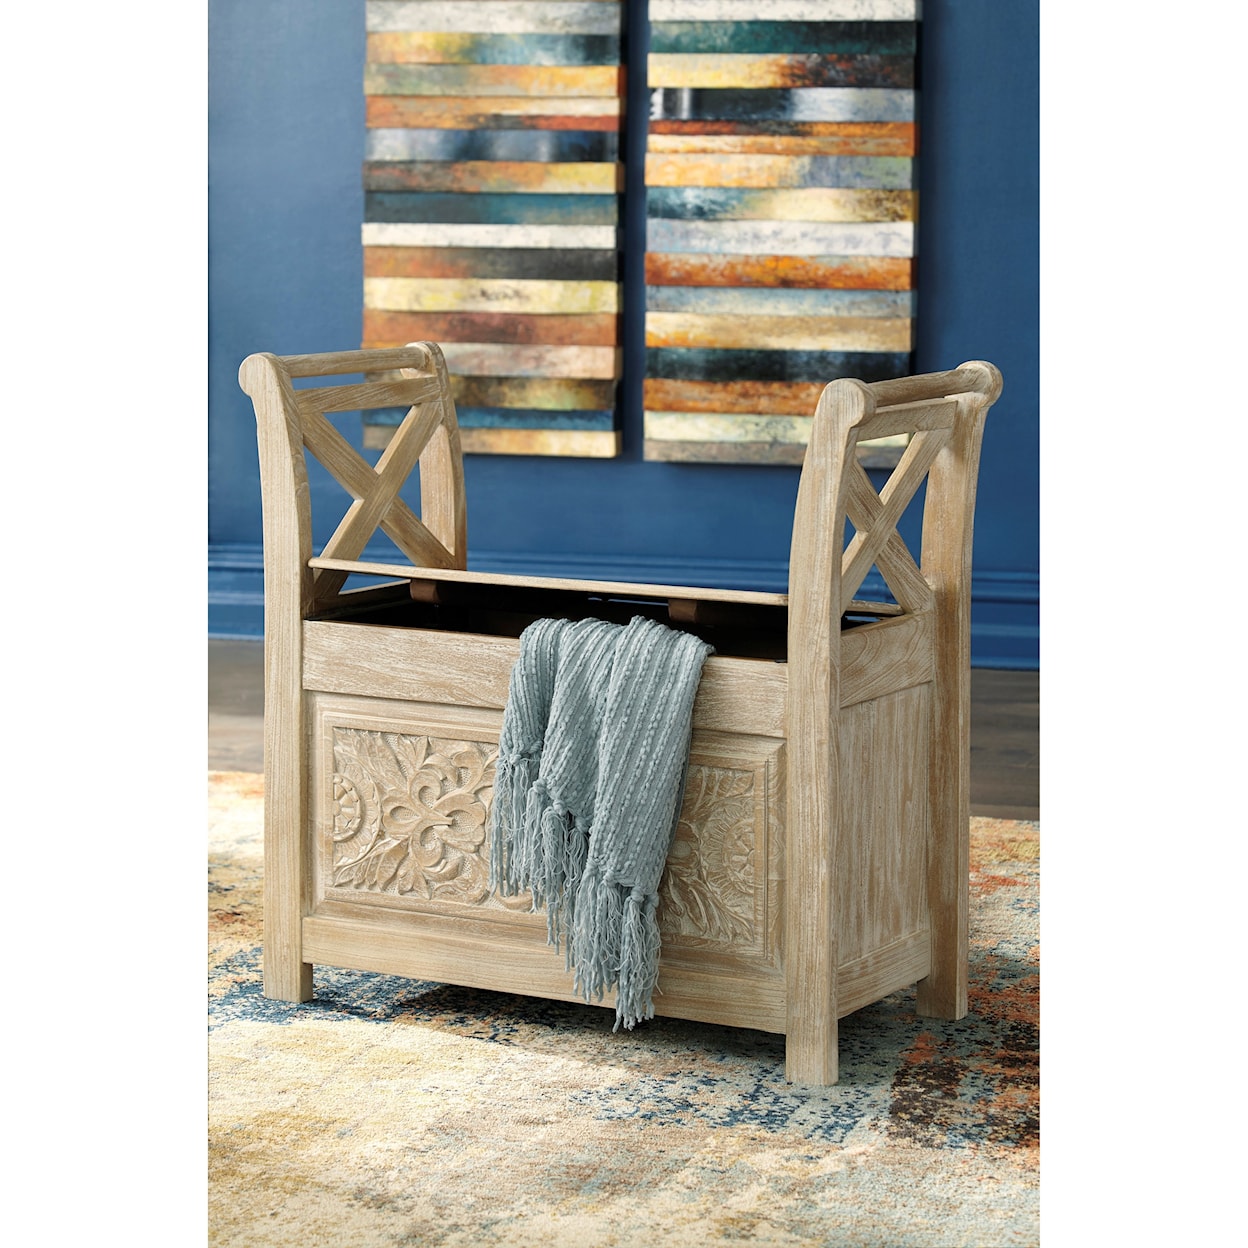 Signature Design by Ashley Fossil Ridge Accent Bench